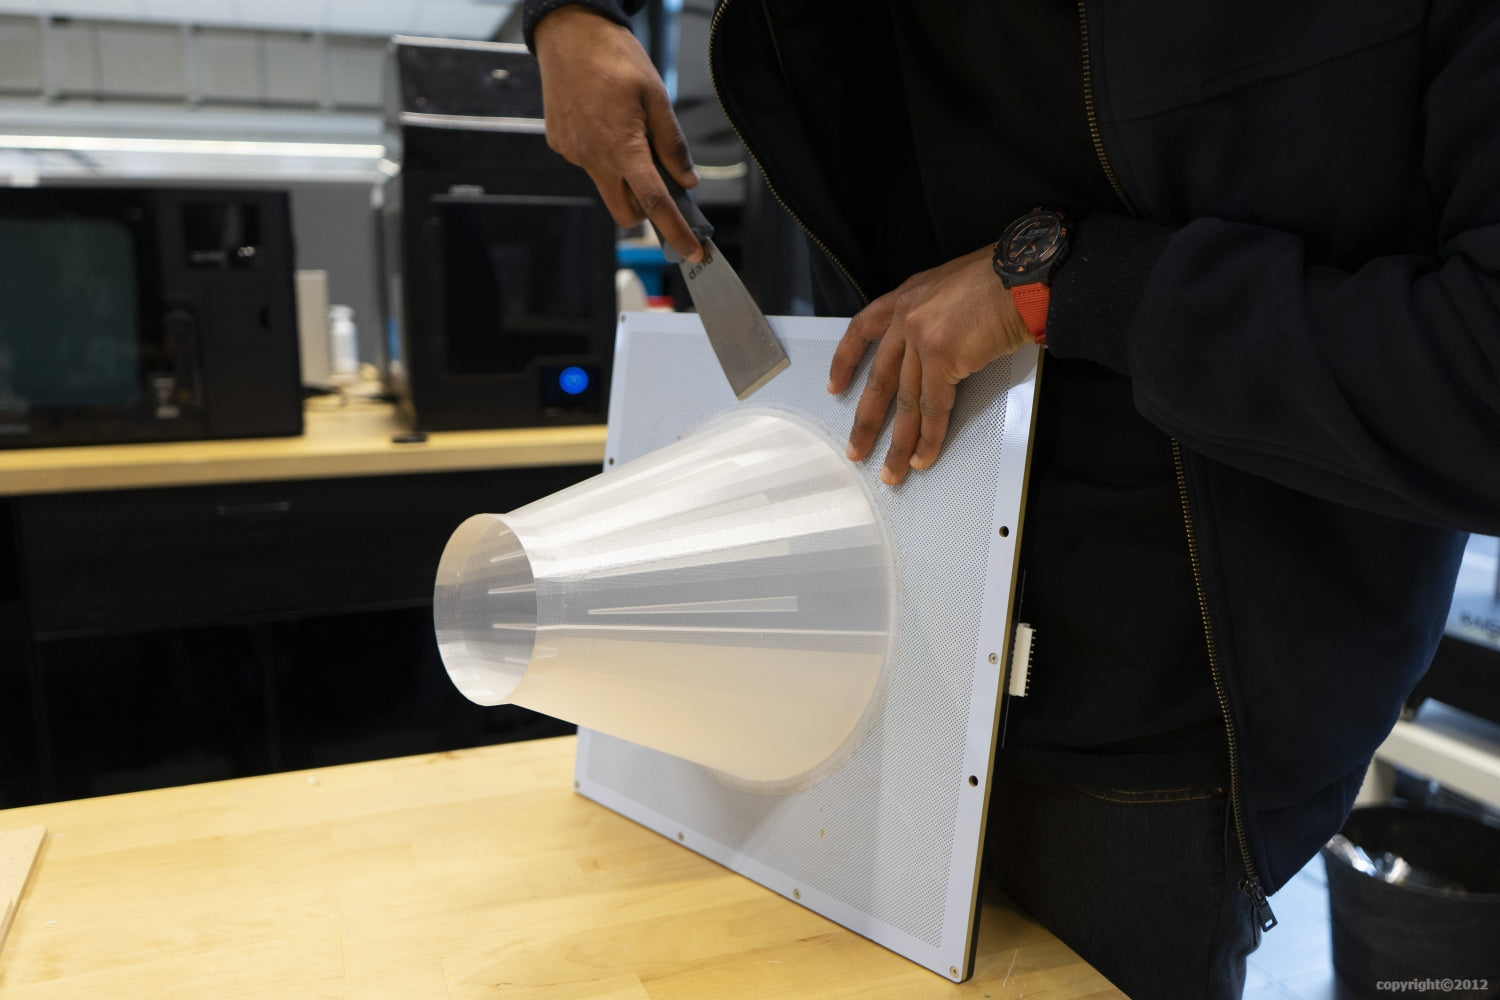 Building Custom Large-scale Audio Systems with 3D Printing